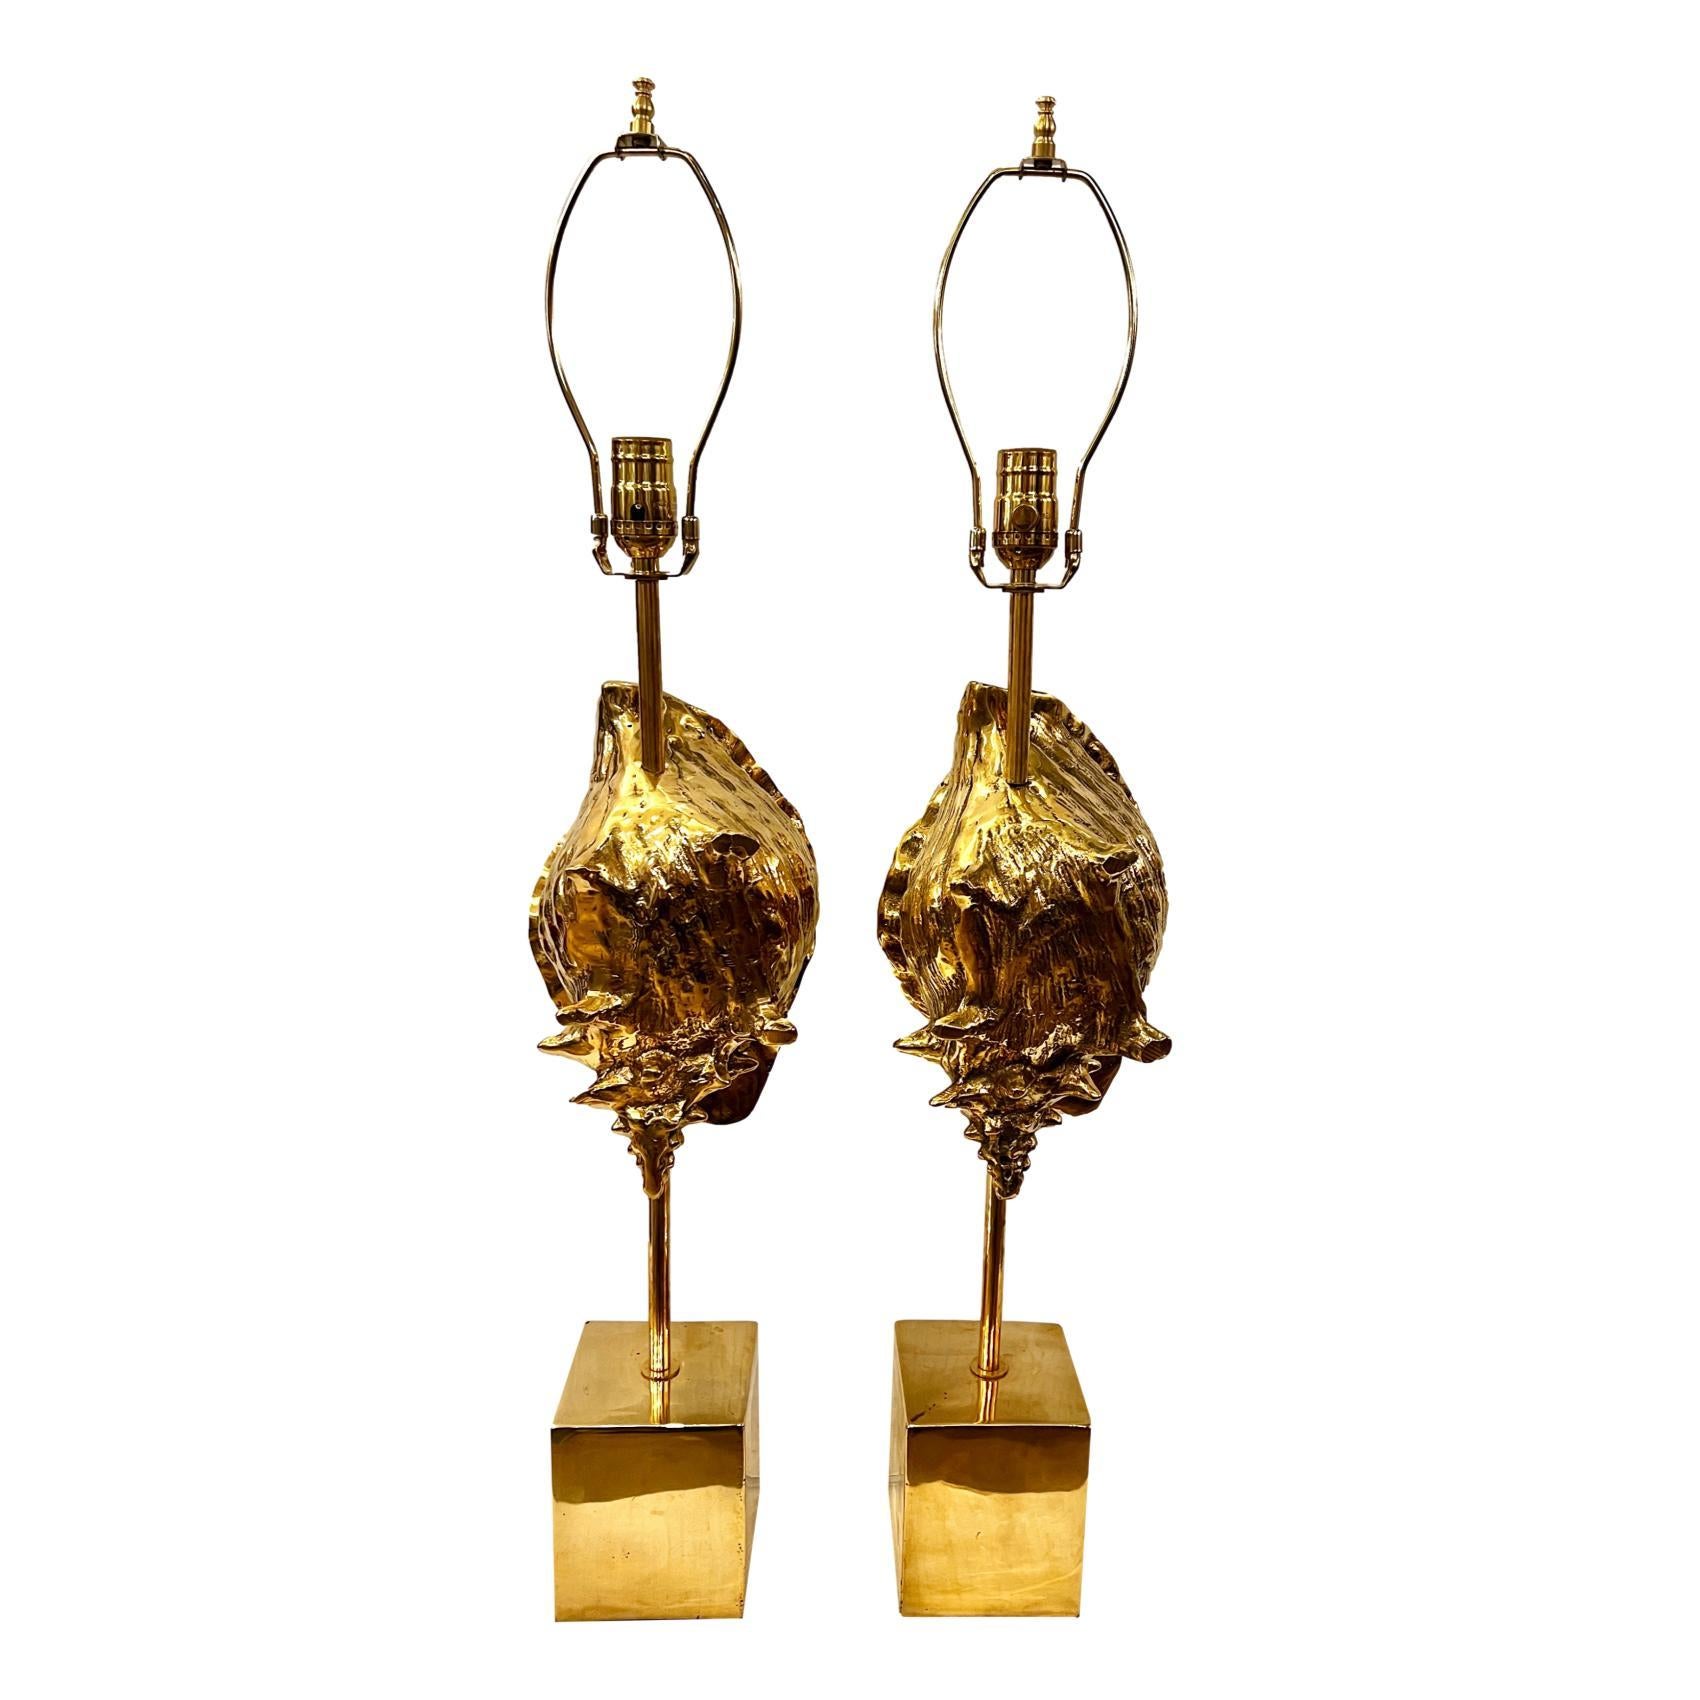 Pair of circa 1960’s Italian polished bronze shell table lamps.

Measurements:
Height of body 22